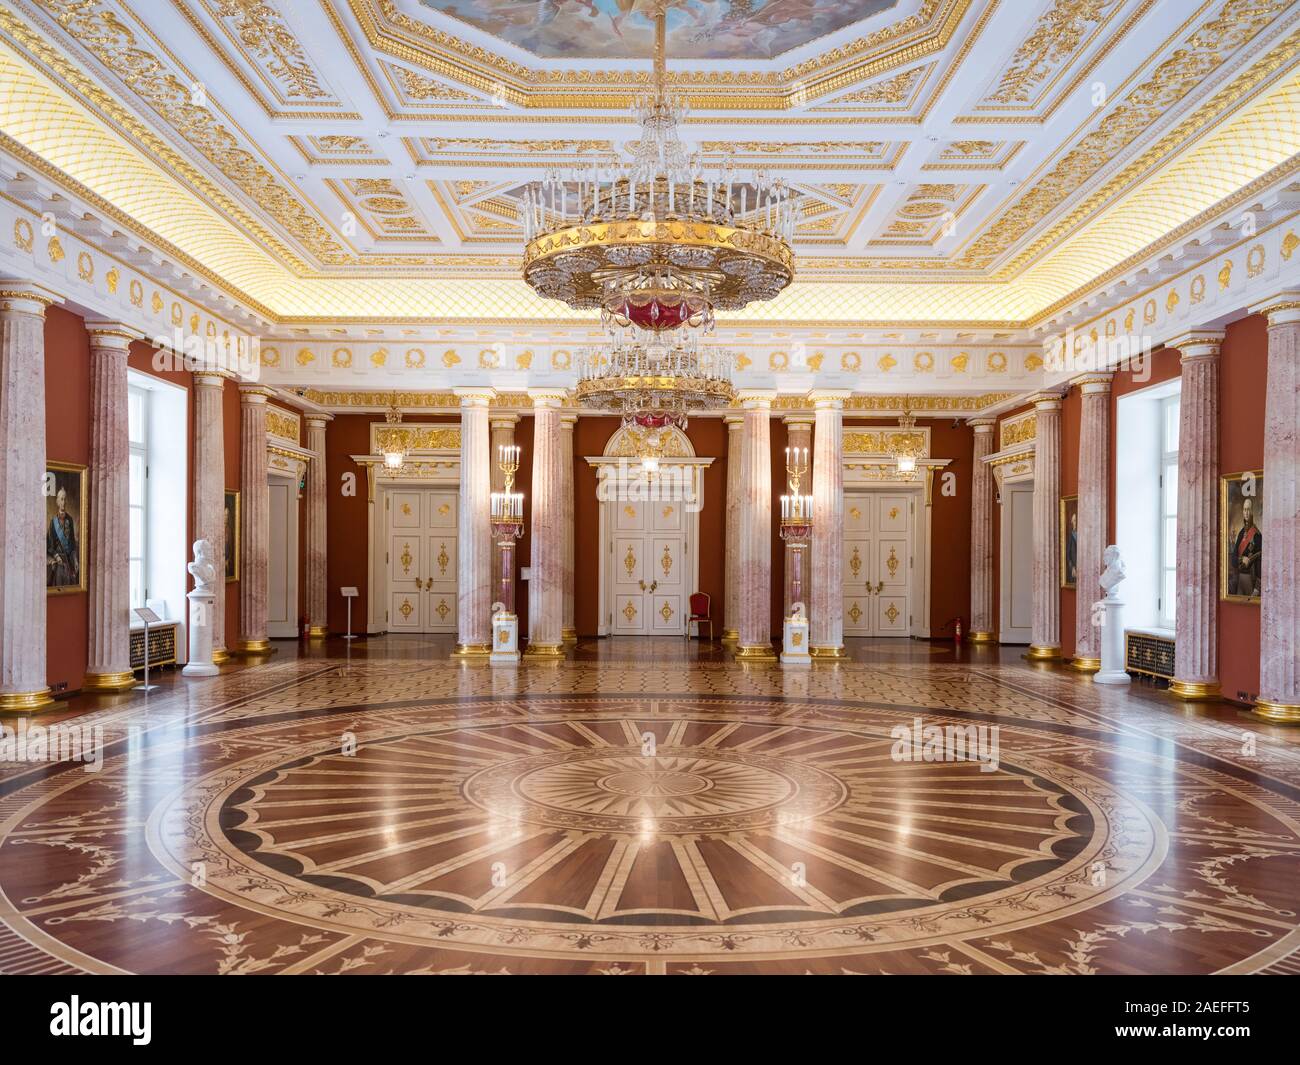 Interior of the Grand Palace in Tsaritsyno in Moscow; Catherine ceremonial Hall; Ballroom; russian culture and heritage Stock Photo